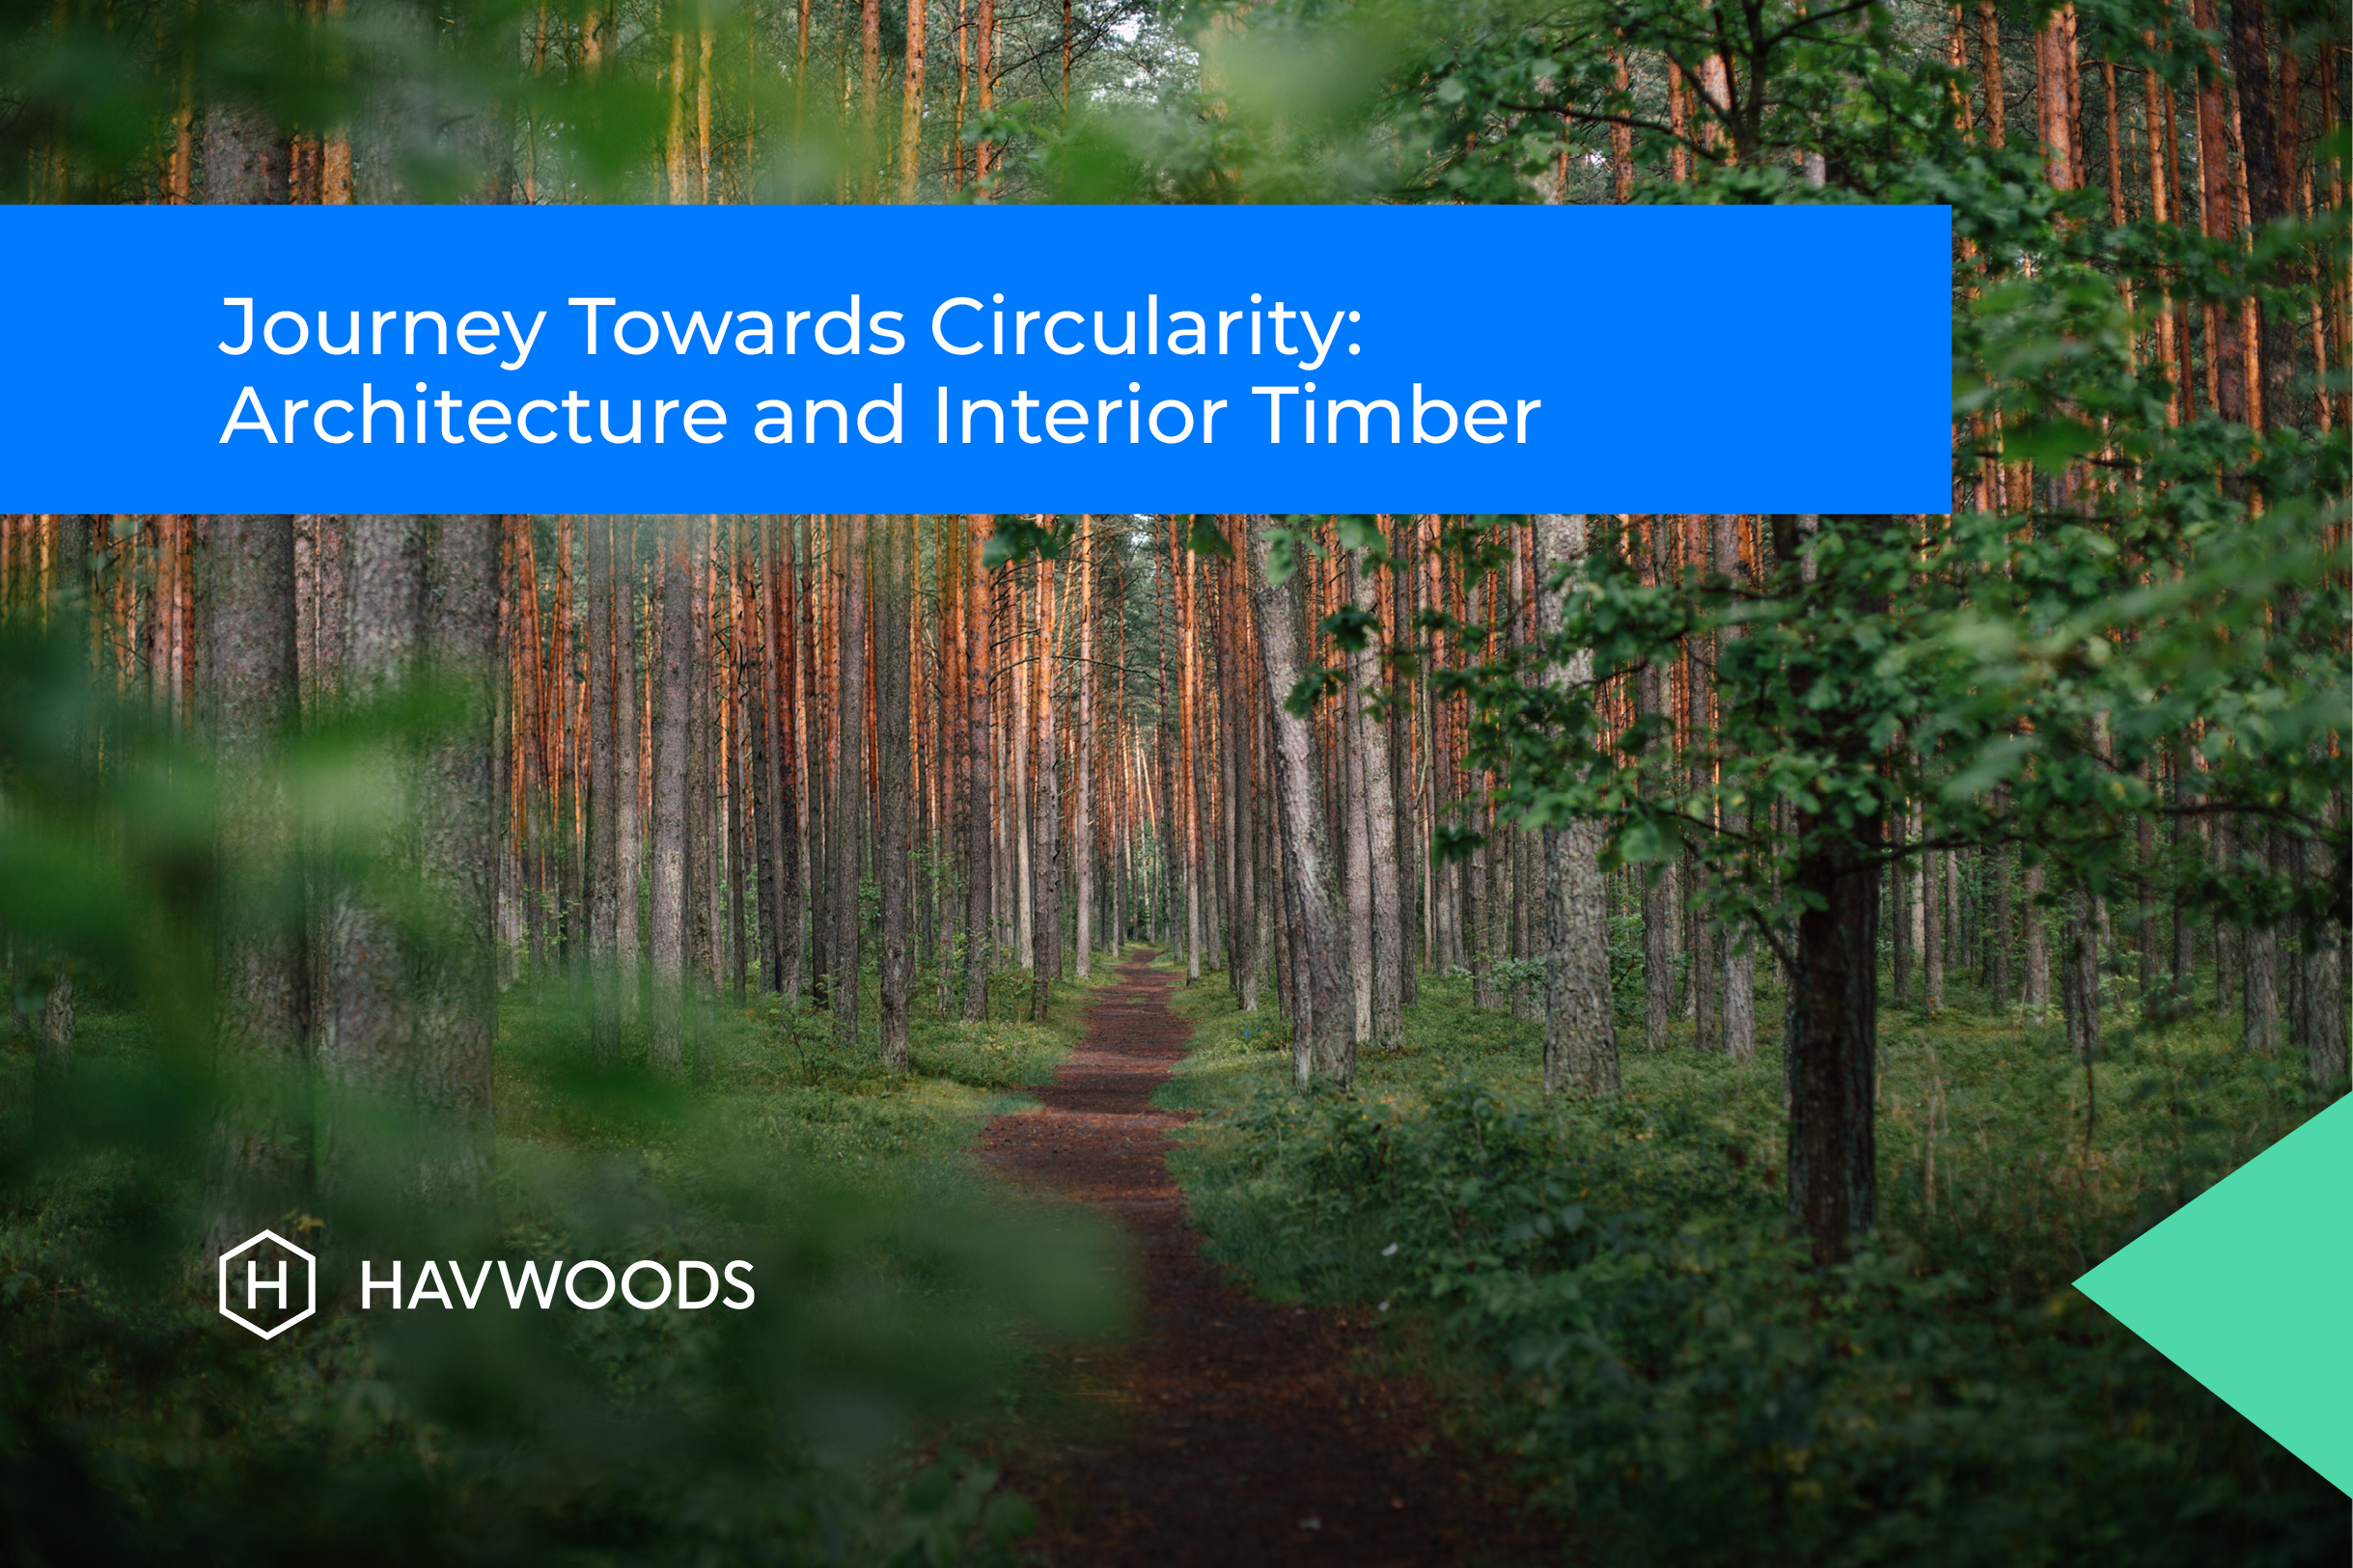 Journey Towards Circularity: Architecture and Interior Timber